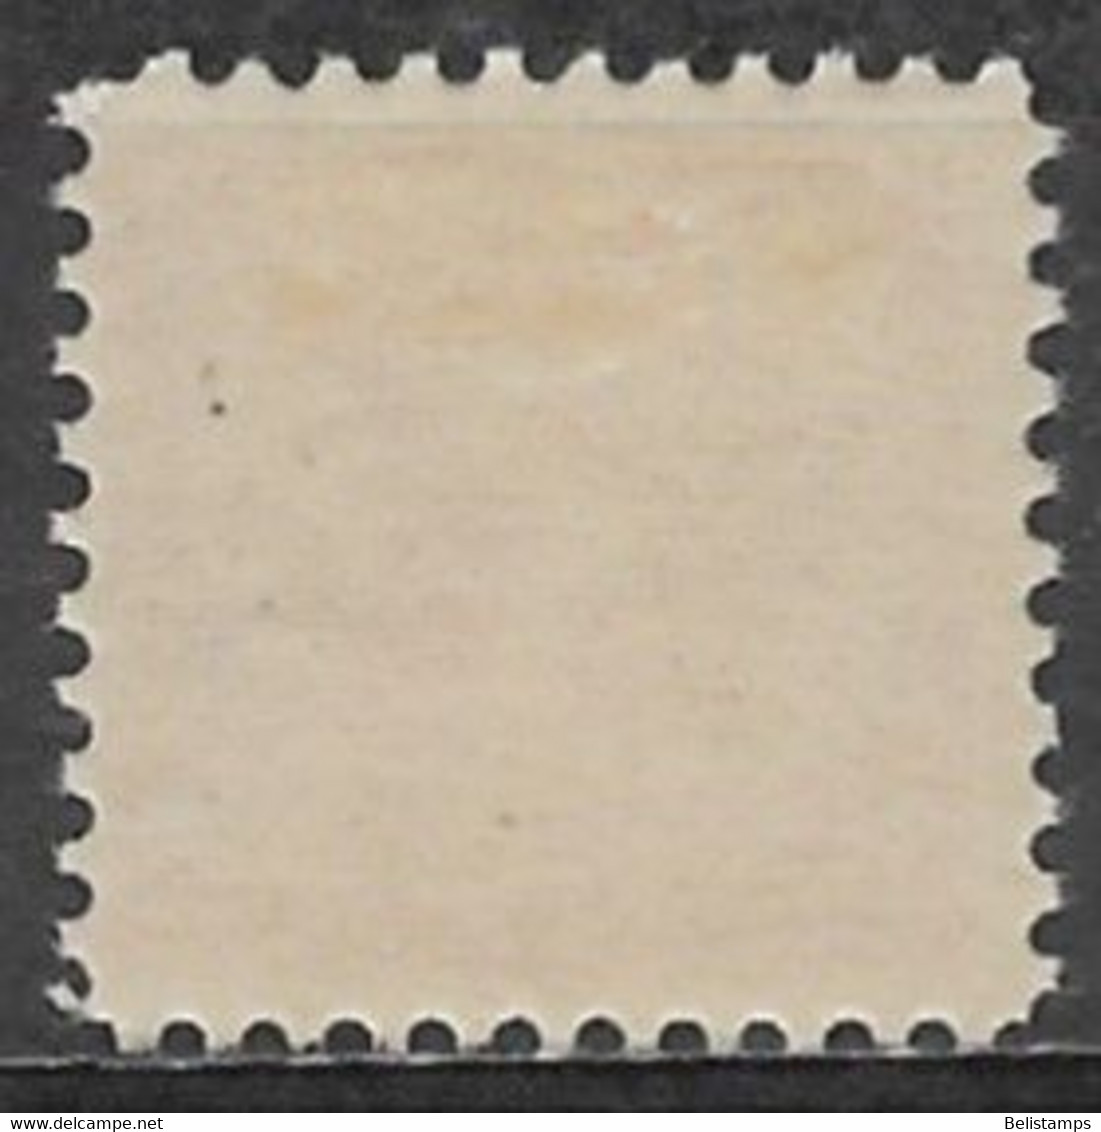 Poland 1919. Scott #J14 (MH) Numeral Of Value - Postage Due